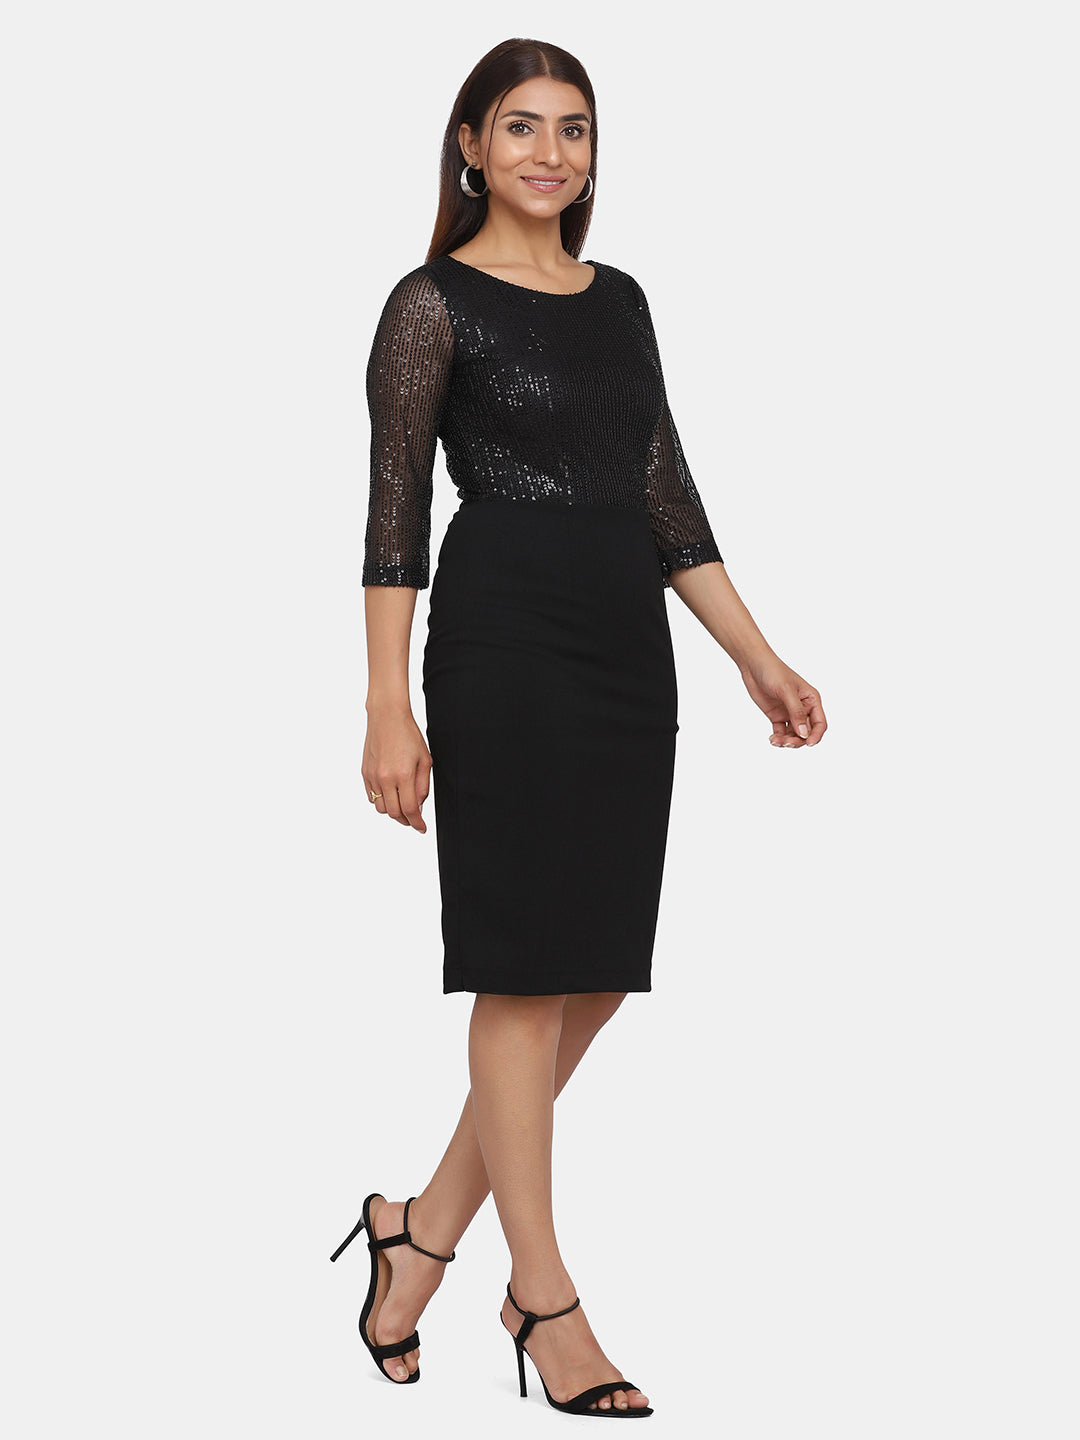 Sequin Stretch Evening Party Dress For women - Black